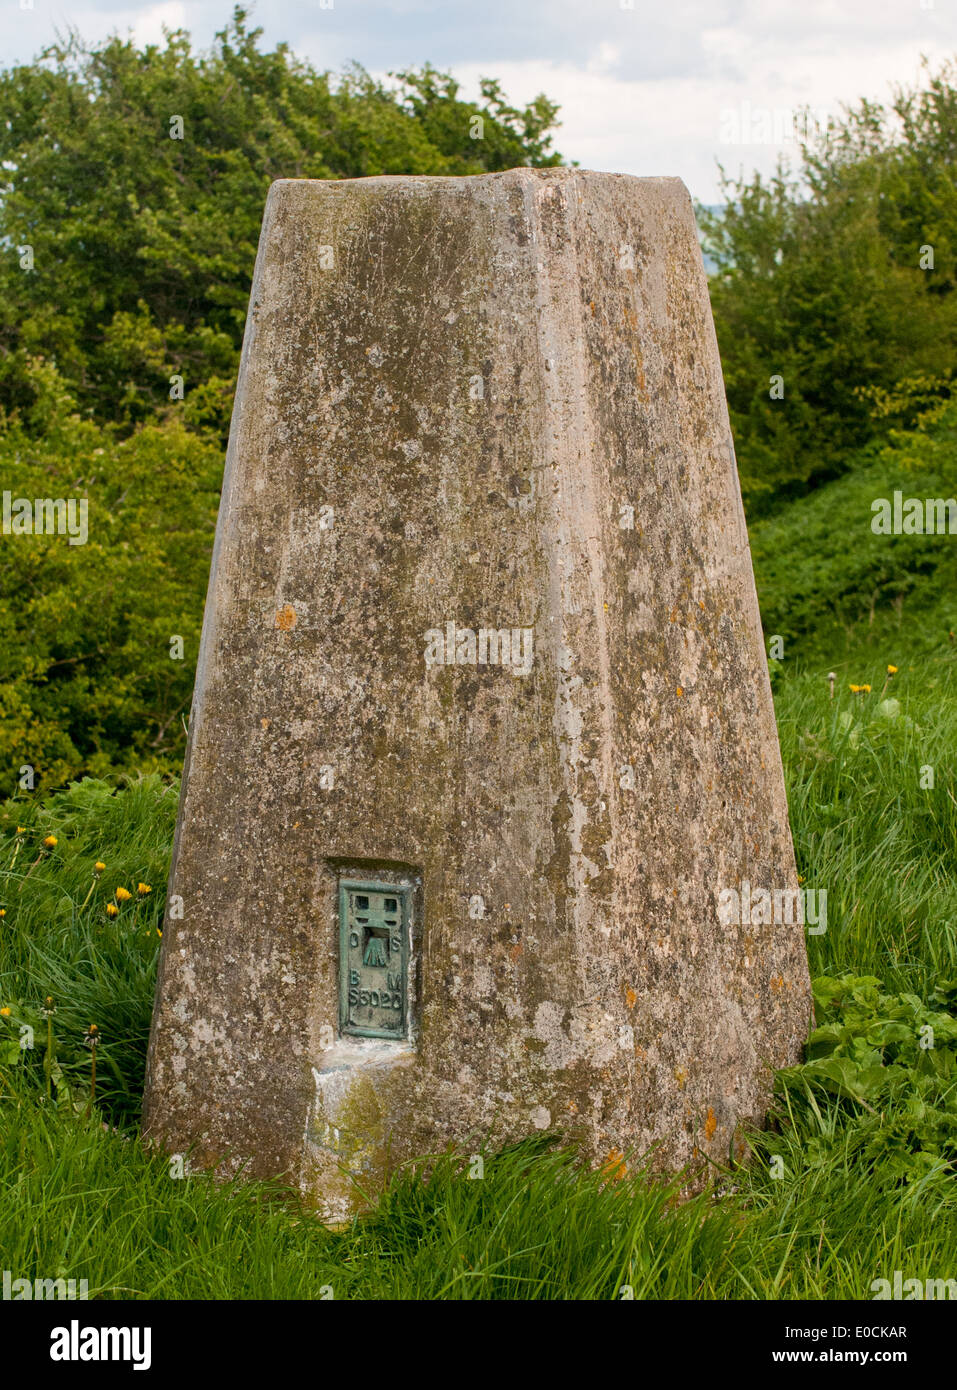 A triangulation station or trig point on a hill top Stock Photo